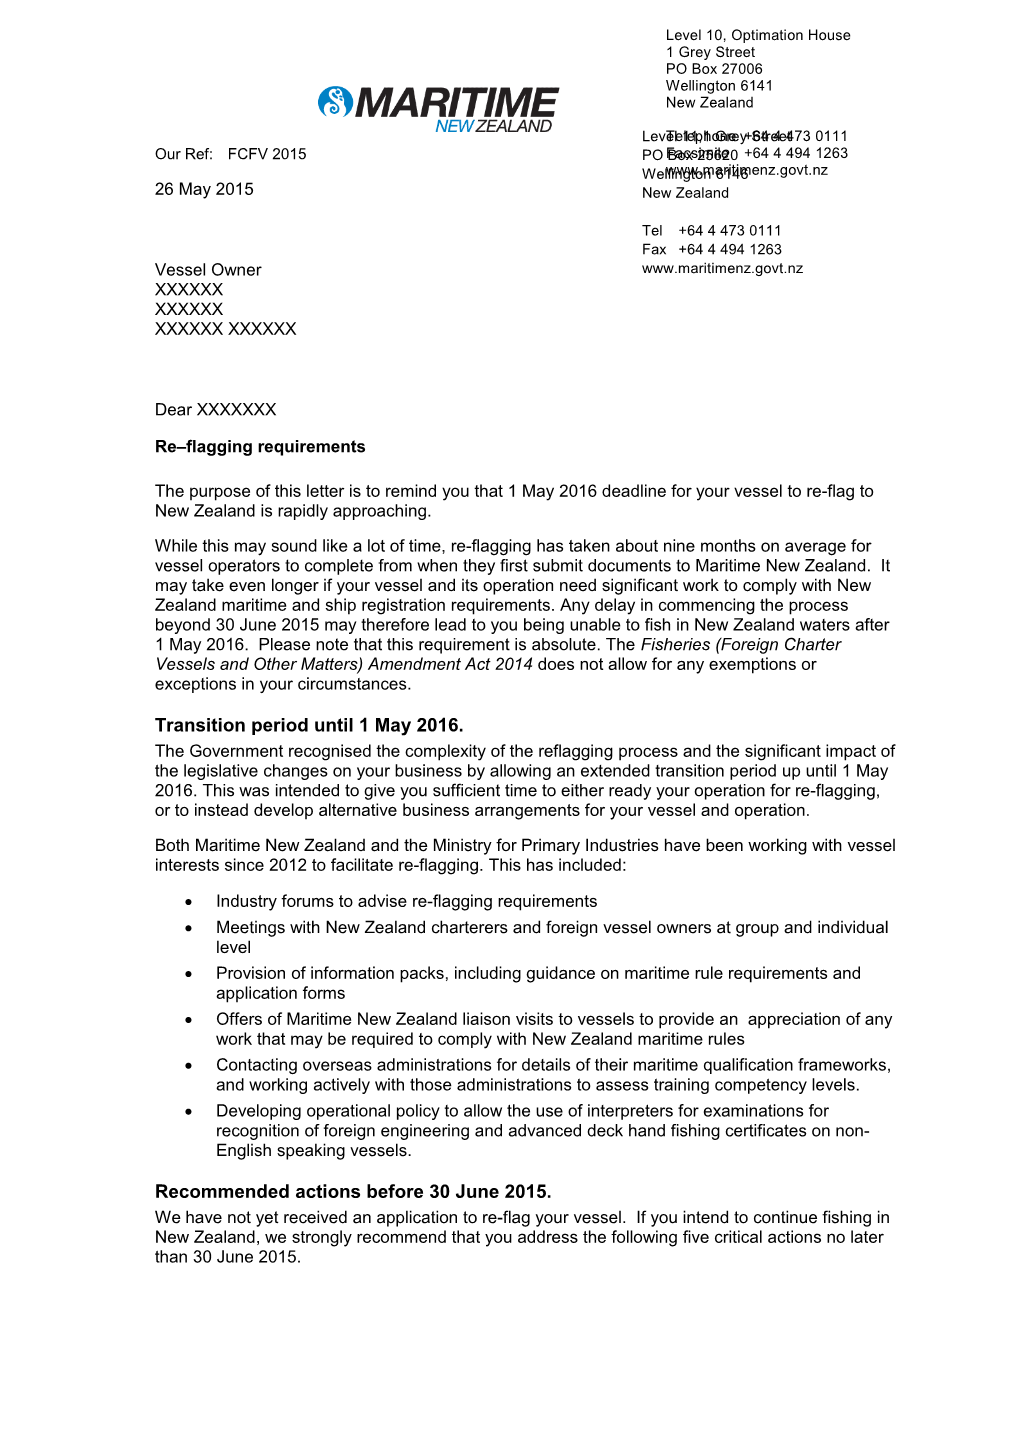 Sharyn Forsyth Letter to Vessel Owner 26 May 2015